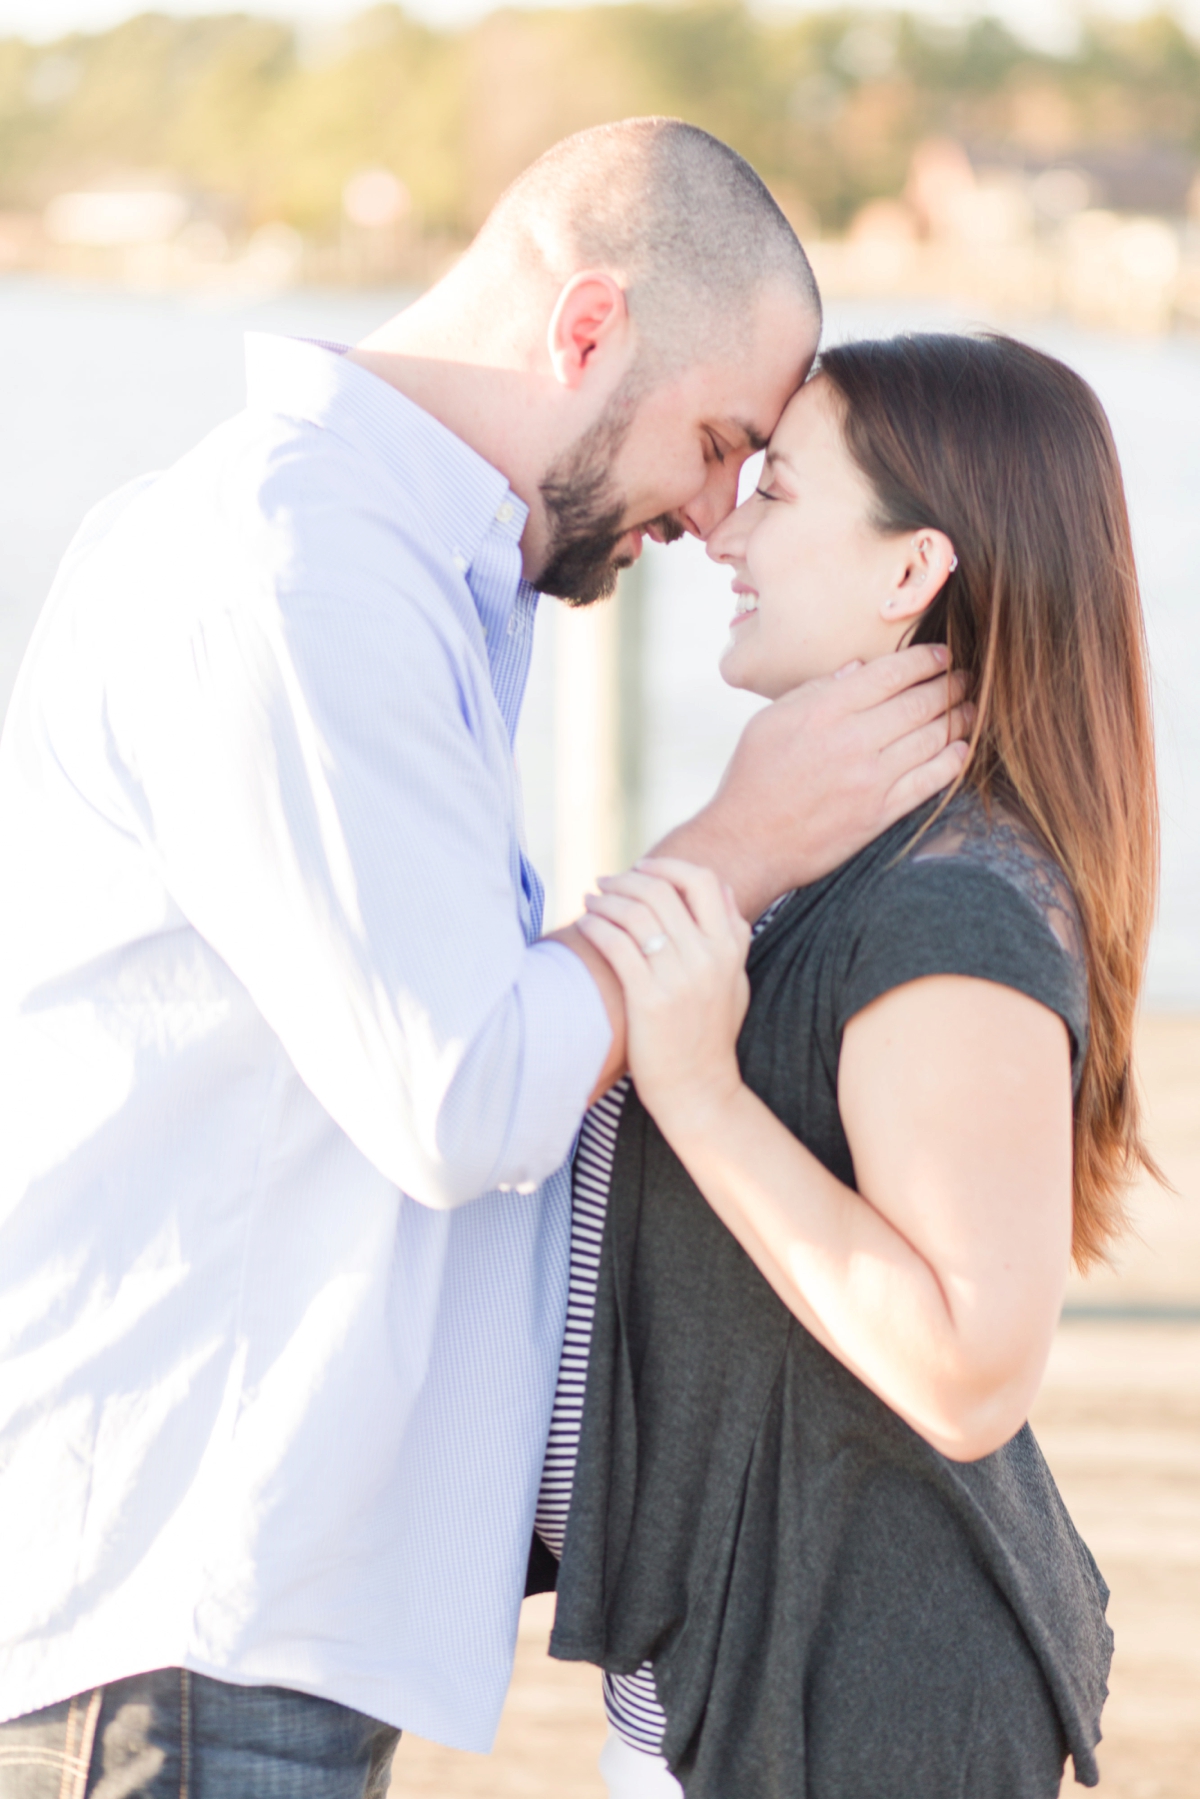 Newport News Engagement Photography by Angie McPherson Photography